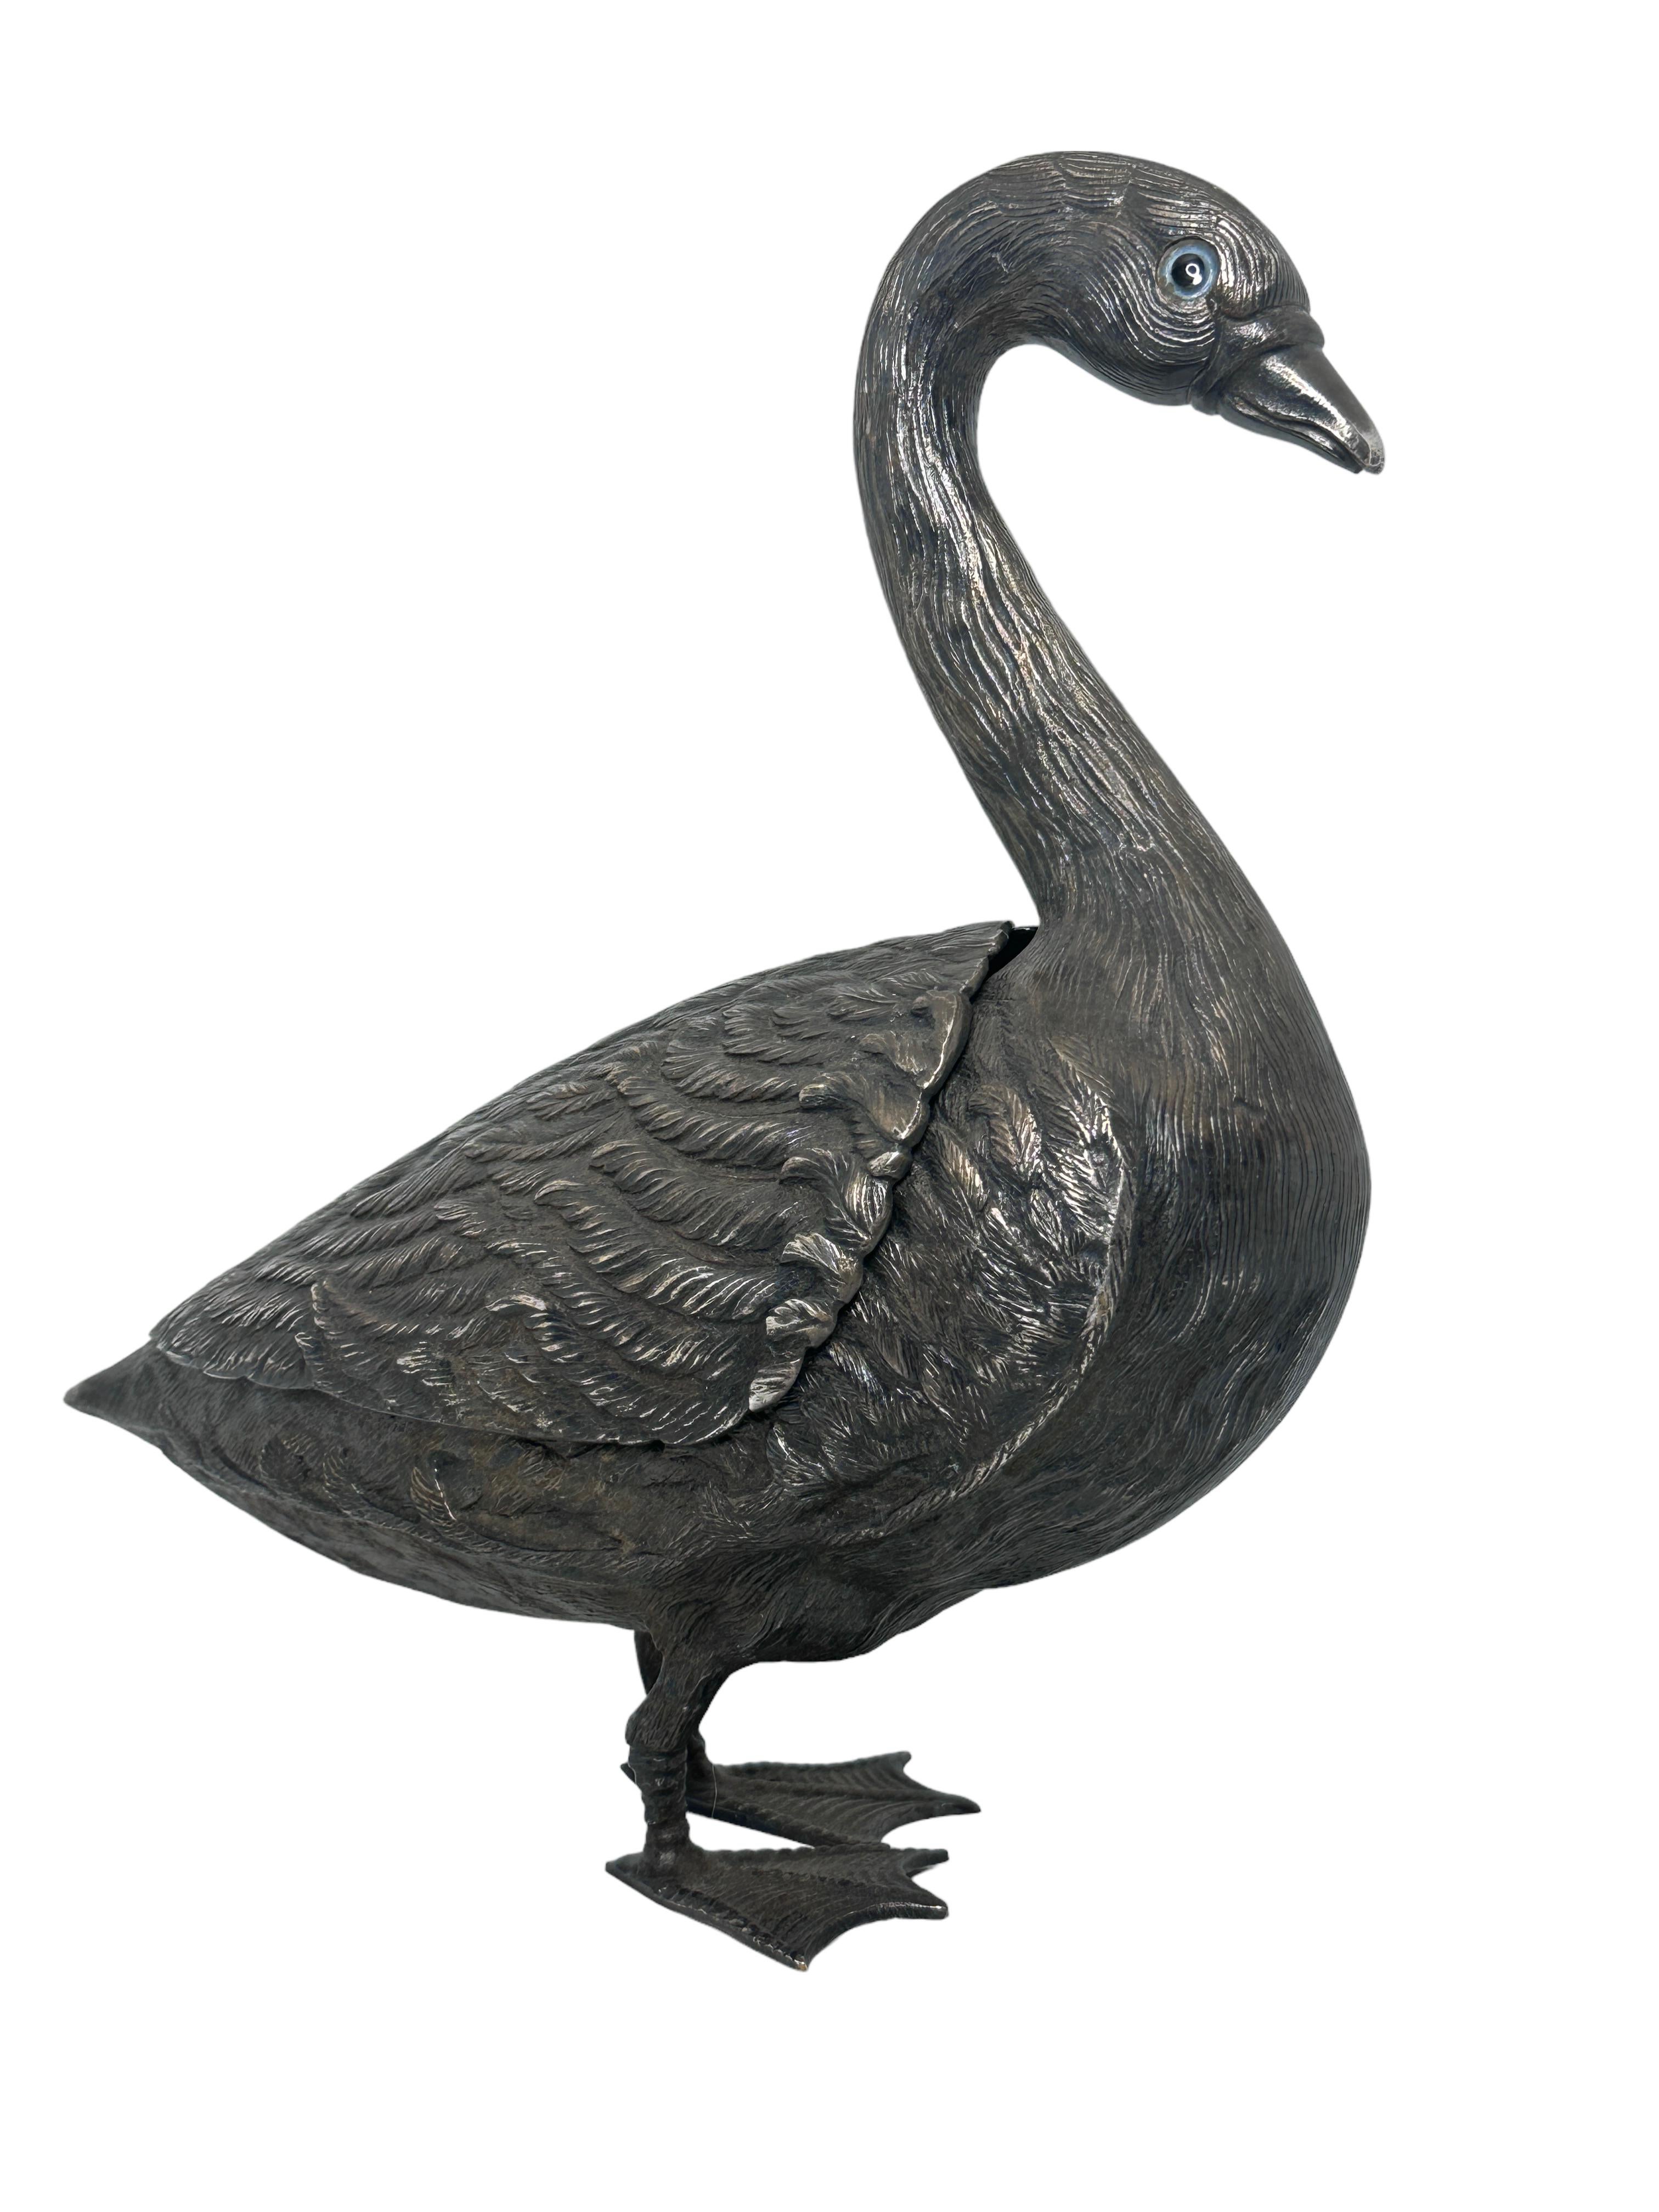 A stunning addition to any room or table. Exquisite form and finely detailed feathers etched with precision into silver-covered metal. Combine whimsical romanticism with streamlined elegance and conjure up the magic of antique European tales. We